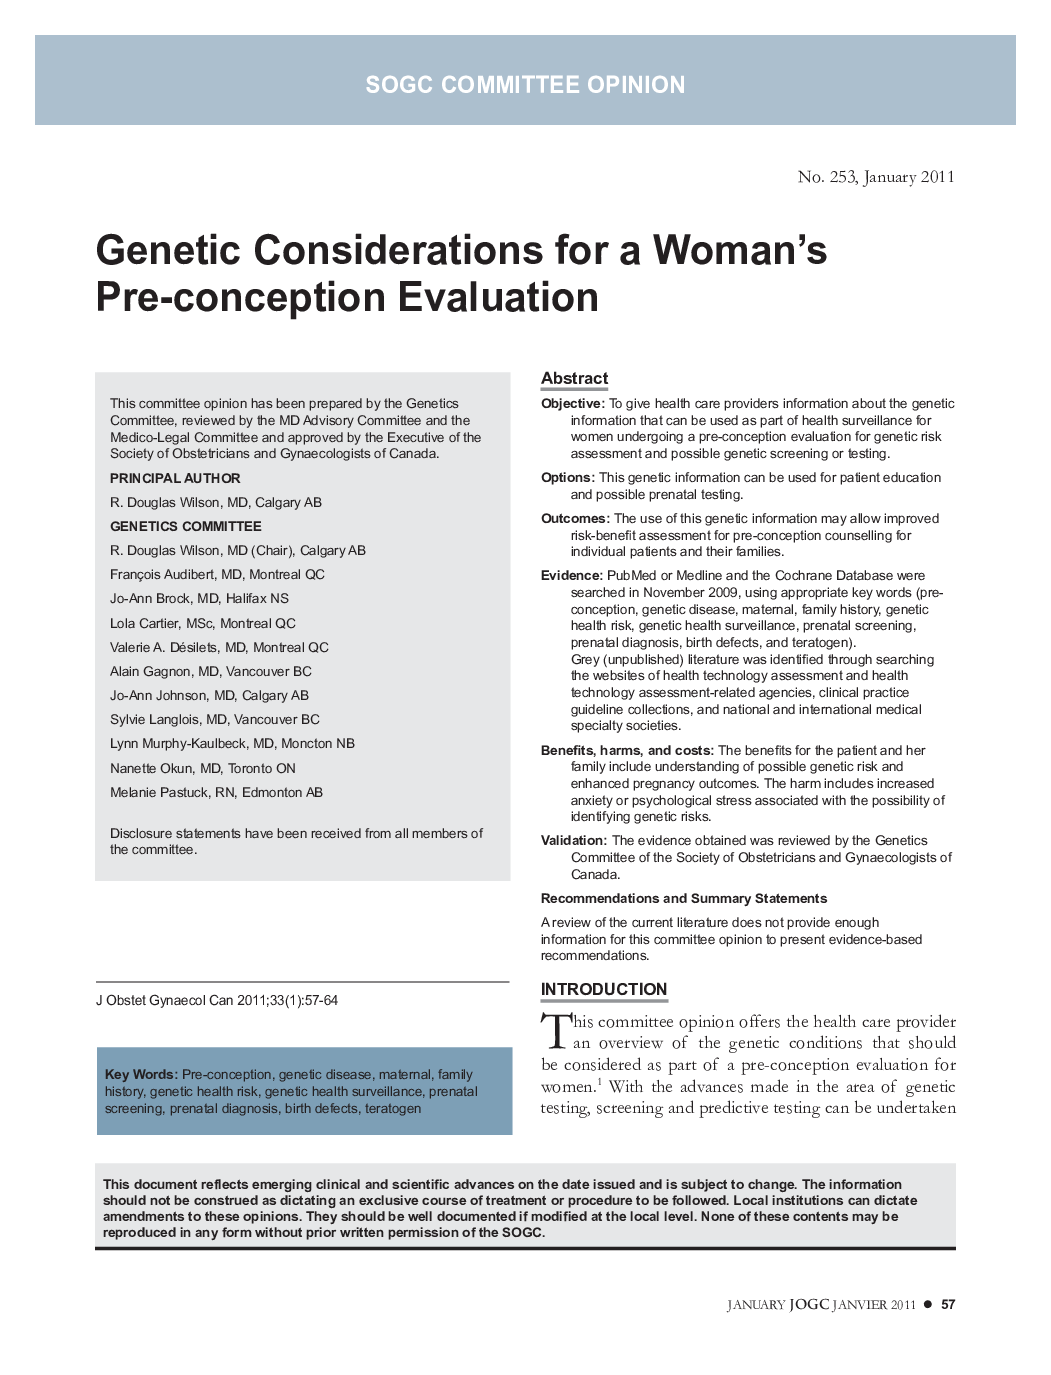 Genetic Considerations for a Woman's Pre-conception Evaluation